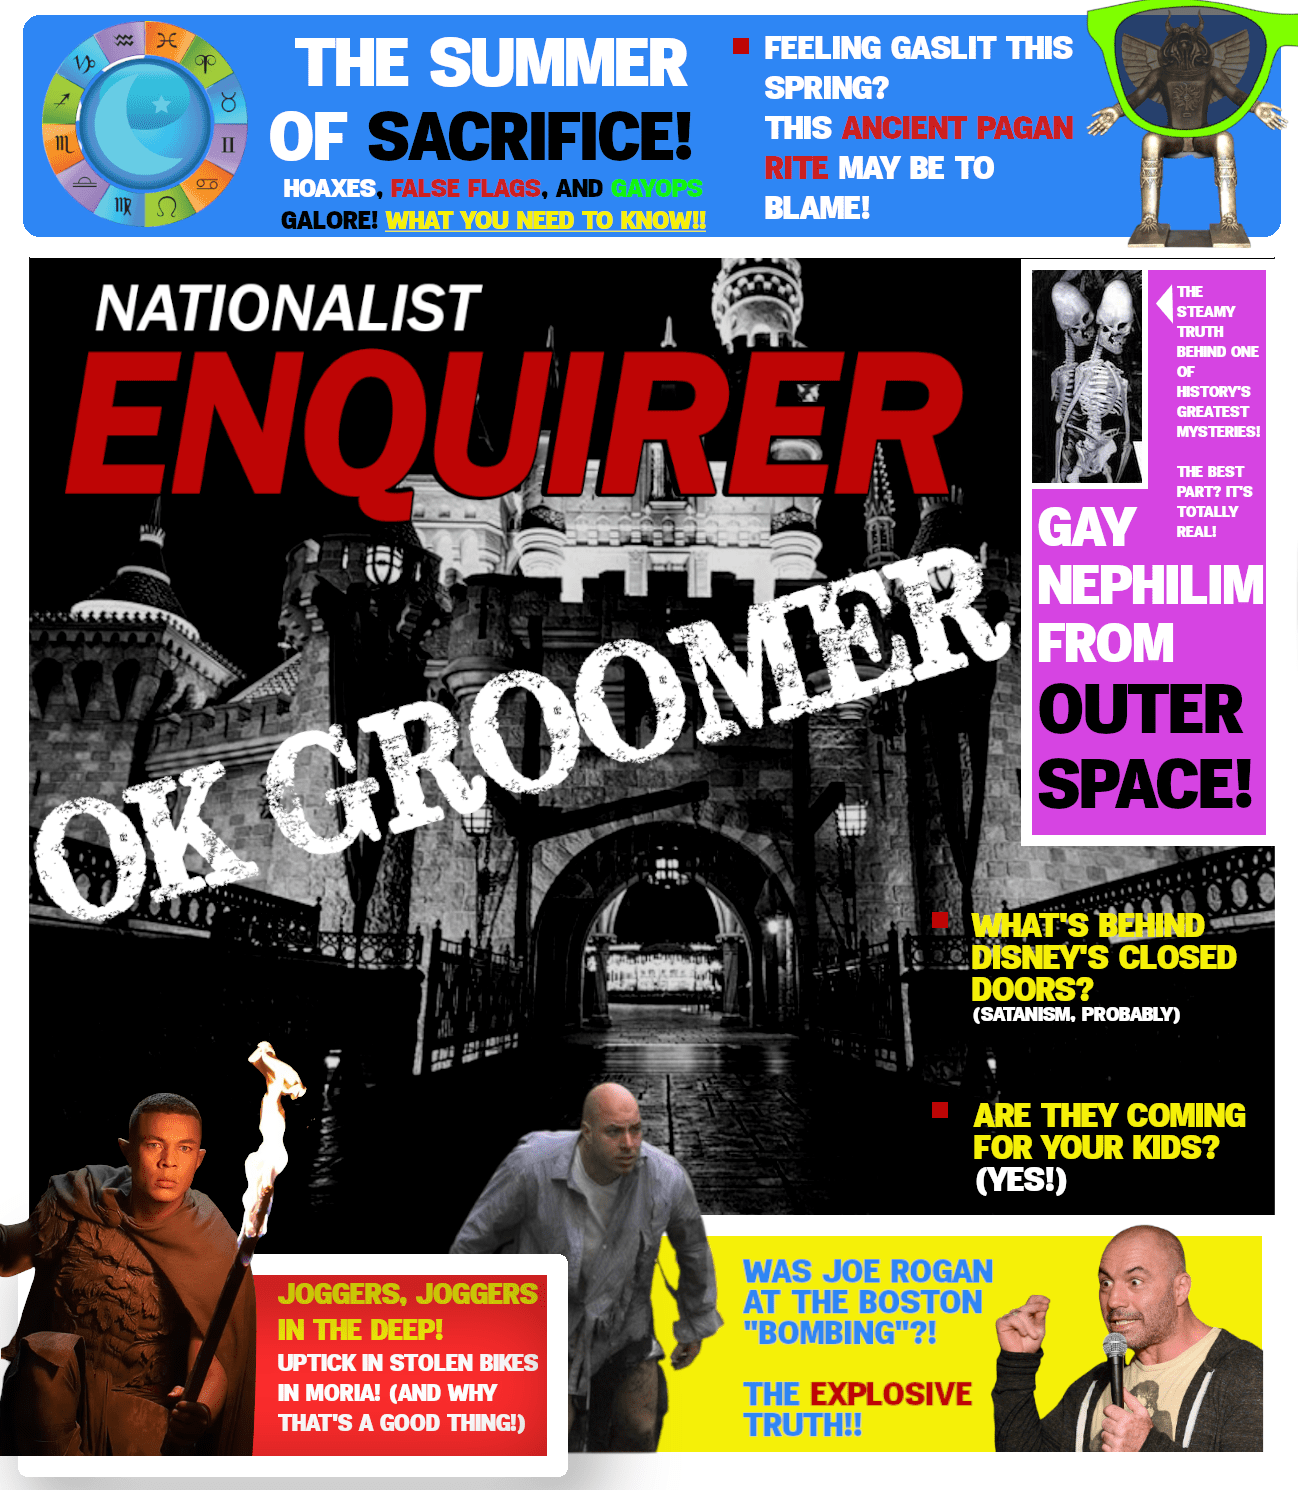 THE NATIONALIST ENQUIRER: #LIBTARDS TRENDING S7 EP32